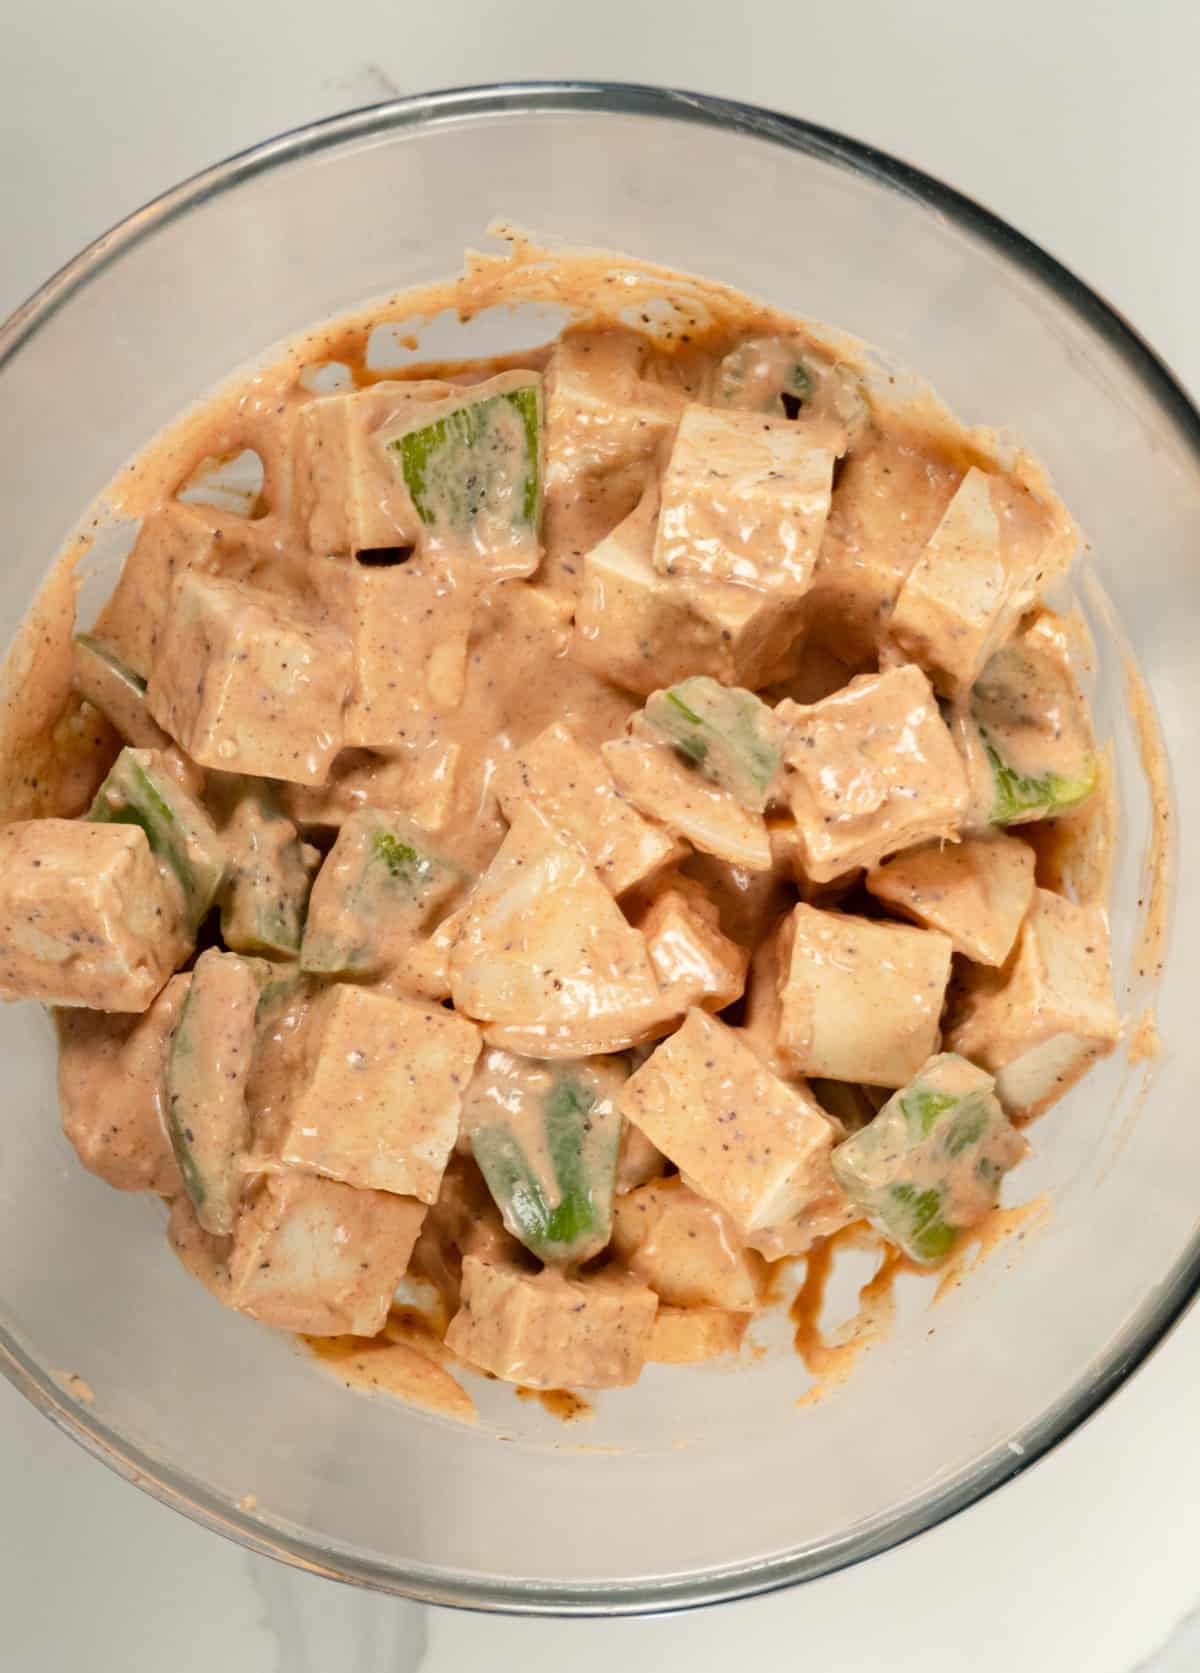 cubes of tufu, pieces of onion and pieces of capsicum in a pinkish sauce in a glass bowl